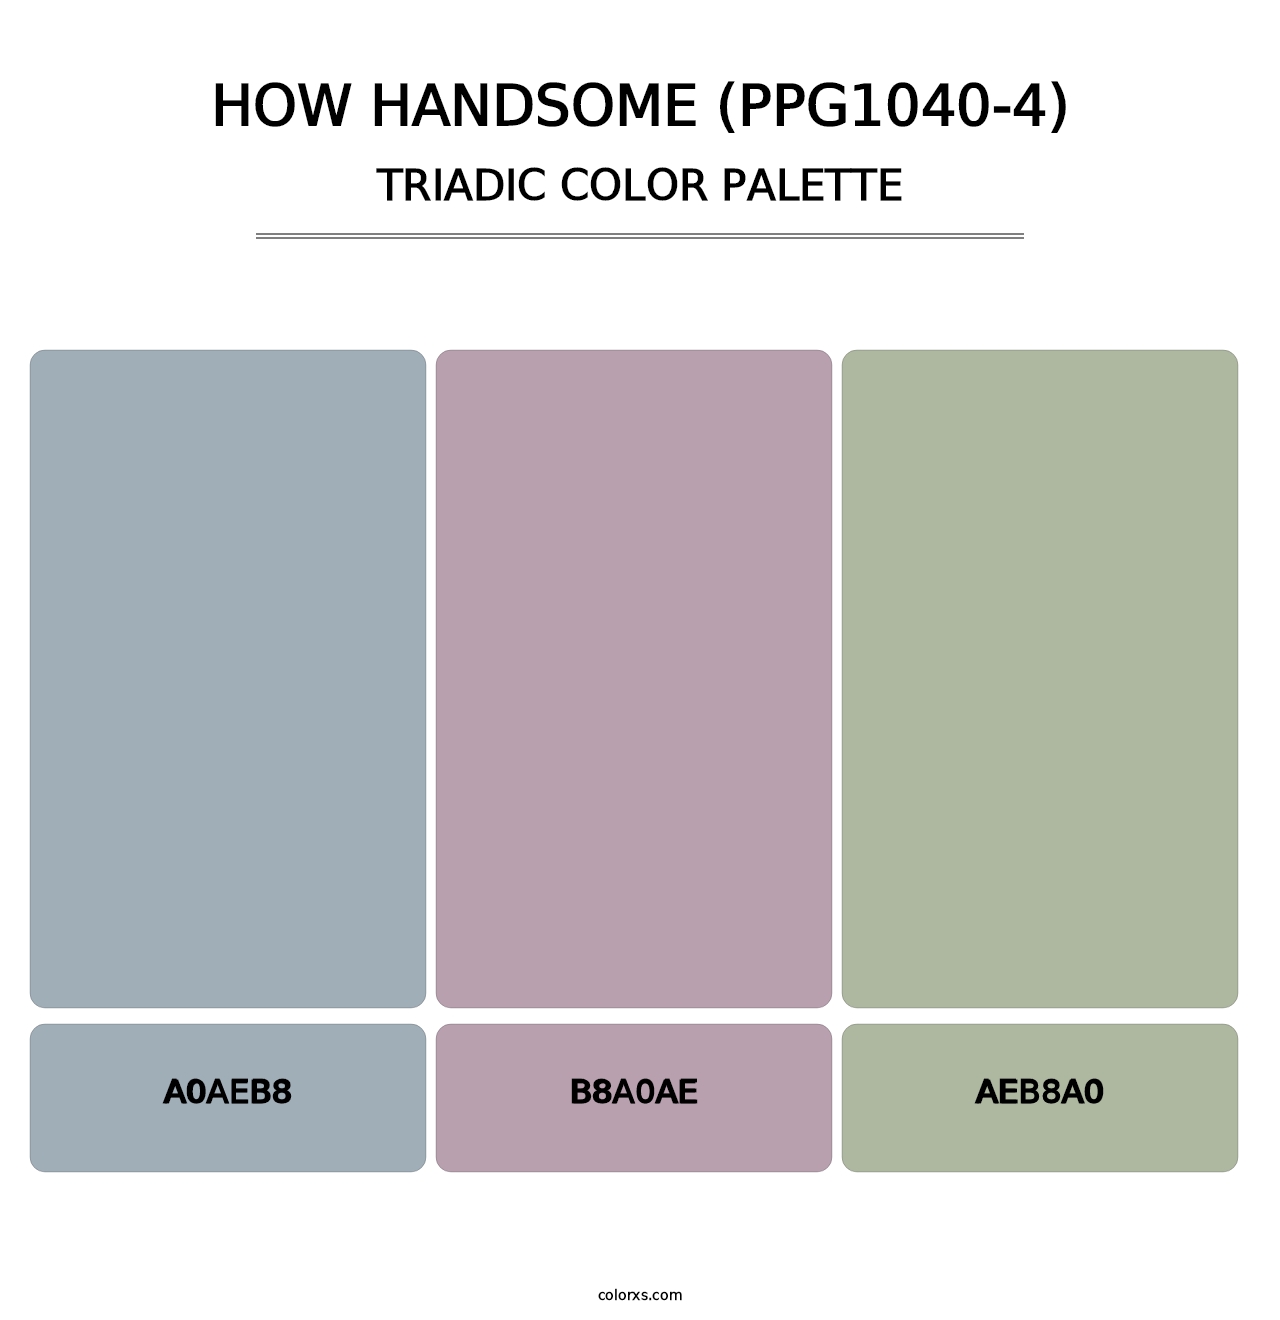 How Handsome (PPG1040-4) - Triadic Color Palette